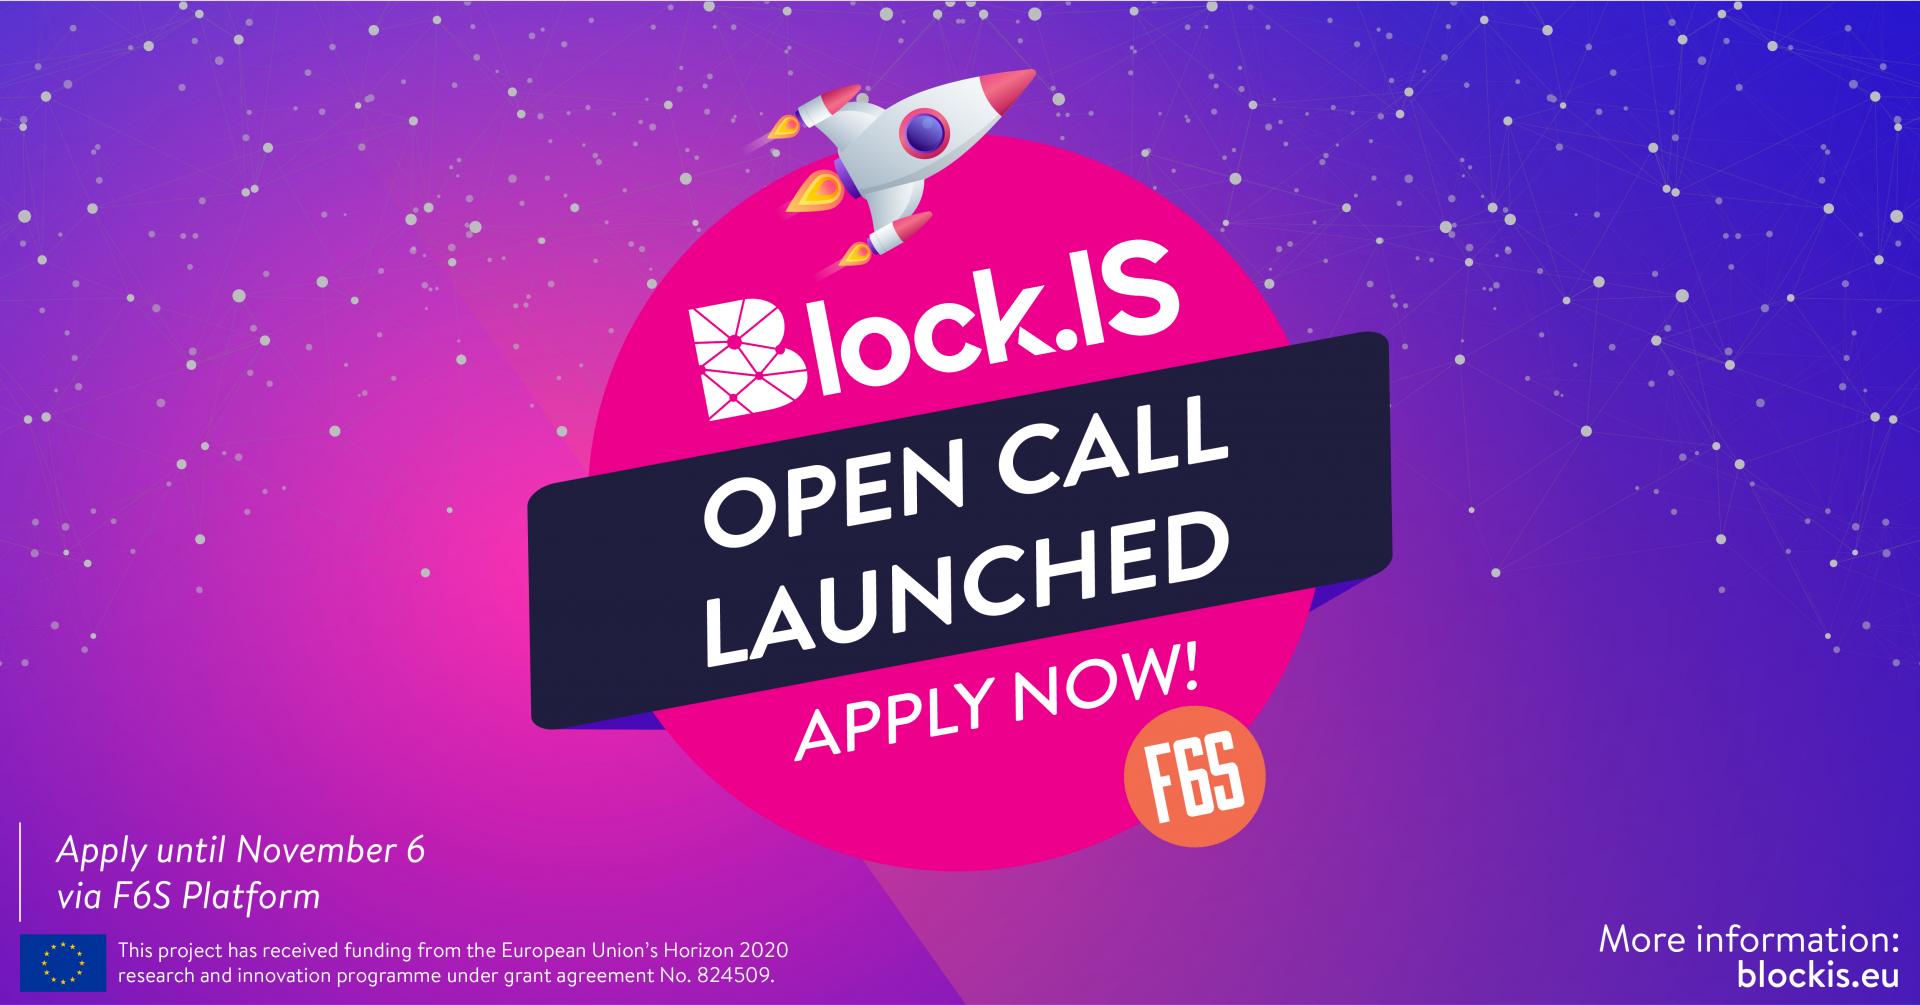 Block.IS Open Call Launched